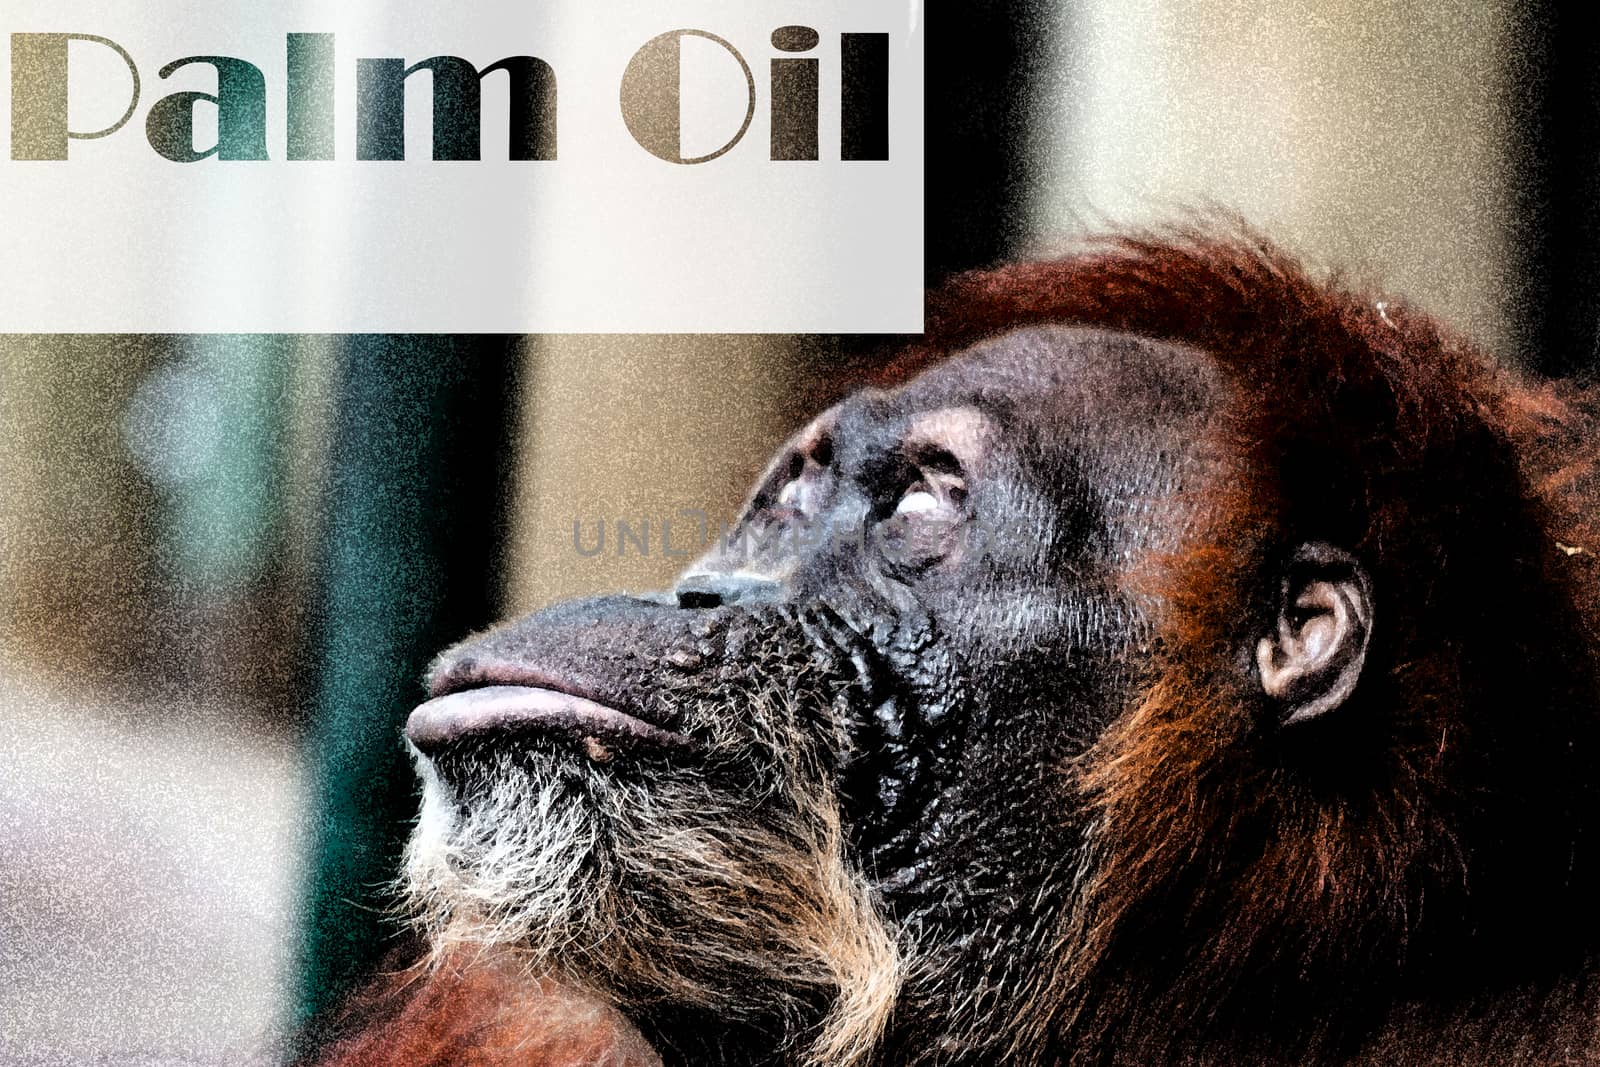 An Orangutan looking at the words palm oil. Deforestation: Borneo tropical rainforest is destroyed for oil palm plantations and human development. by mynewturtle1